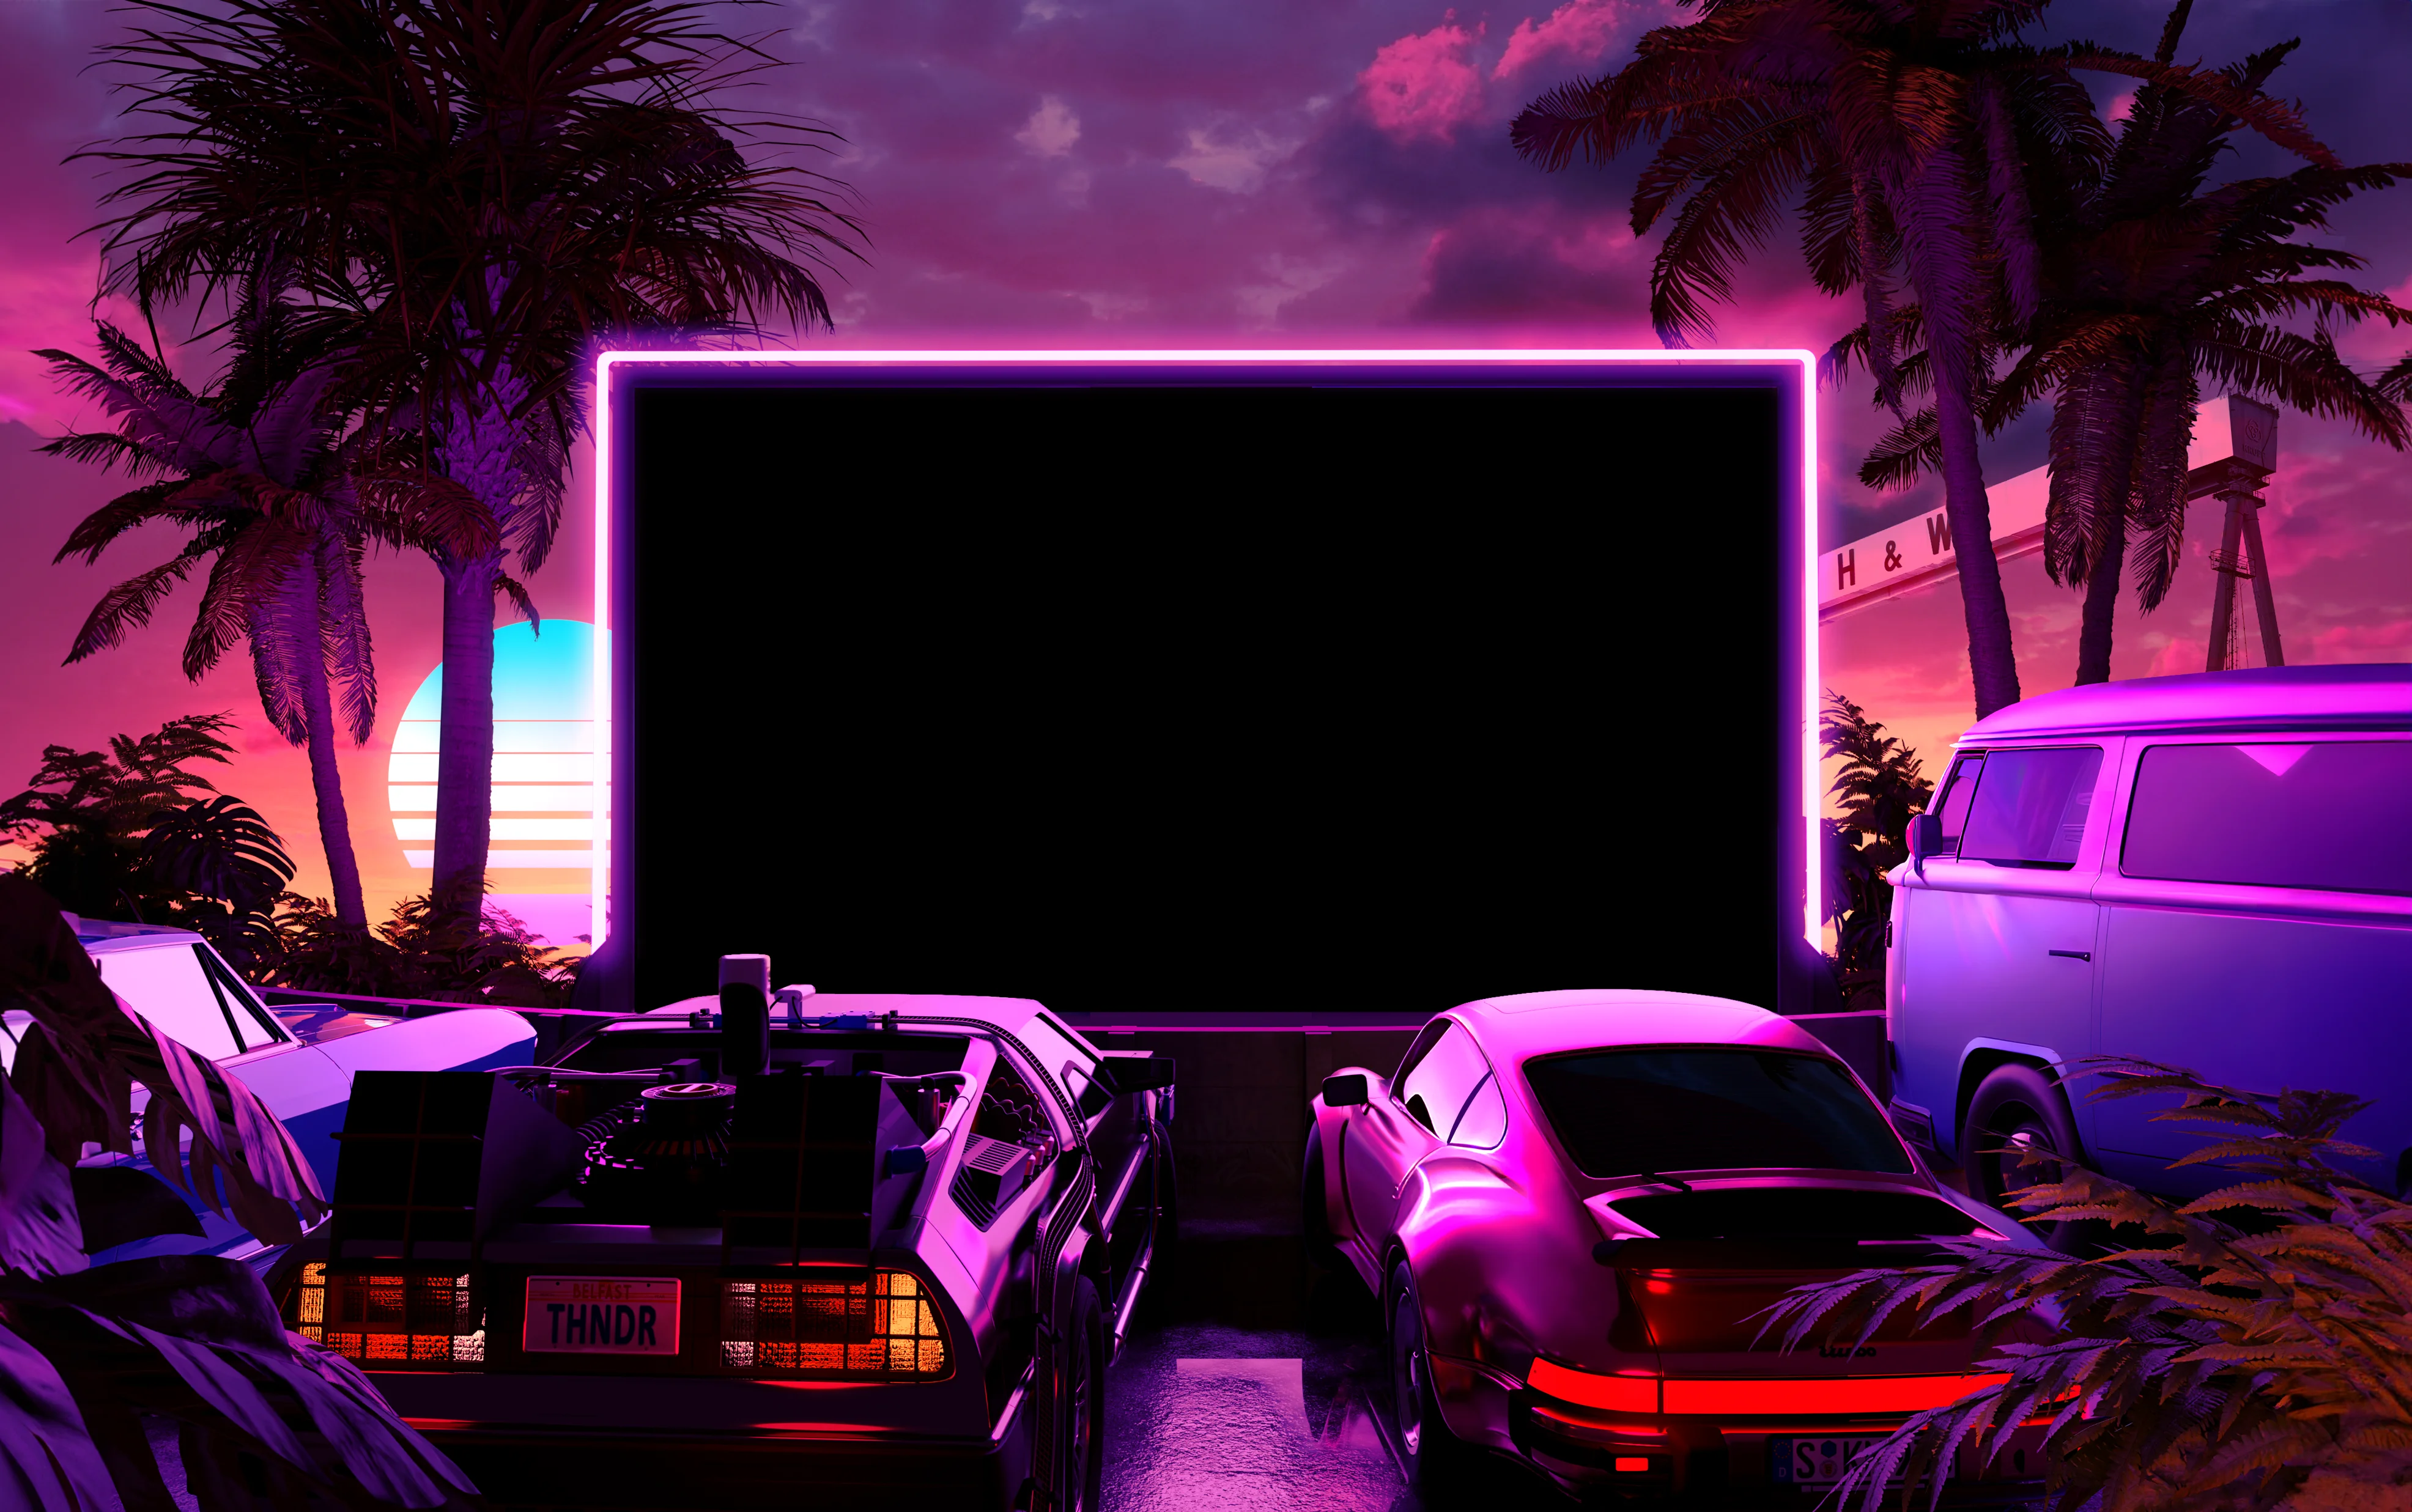 An image of 4 vehicles in front of a drive-in cinema screen